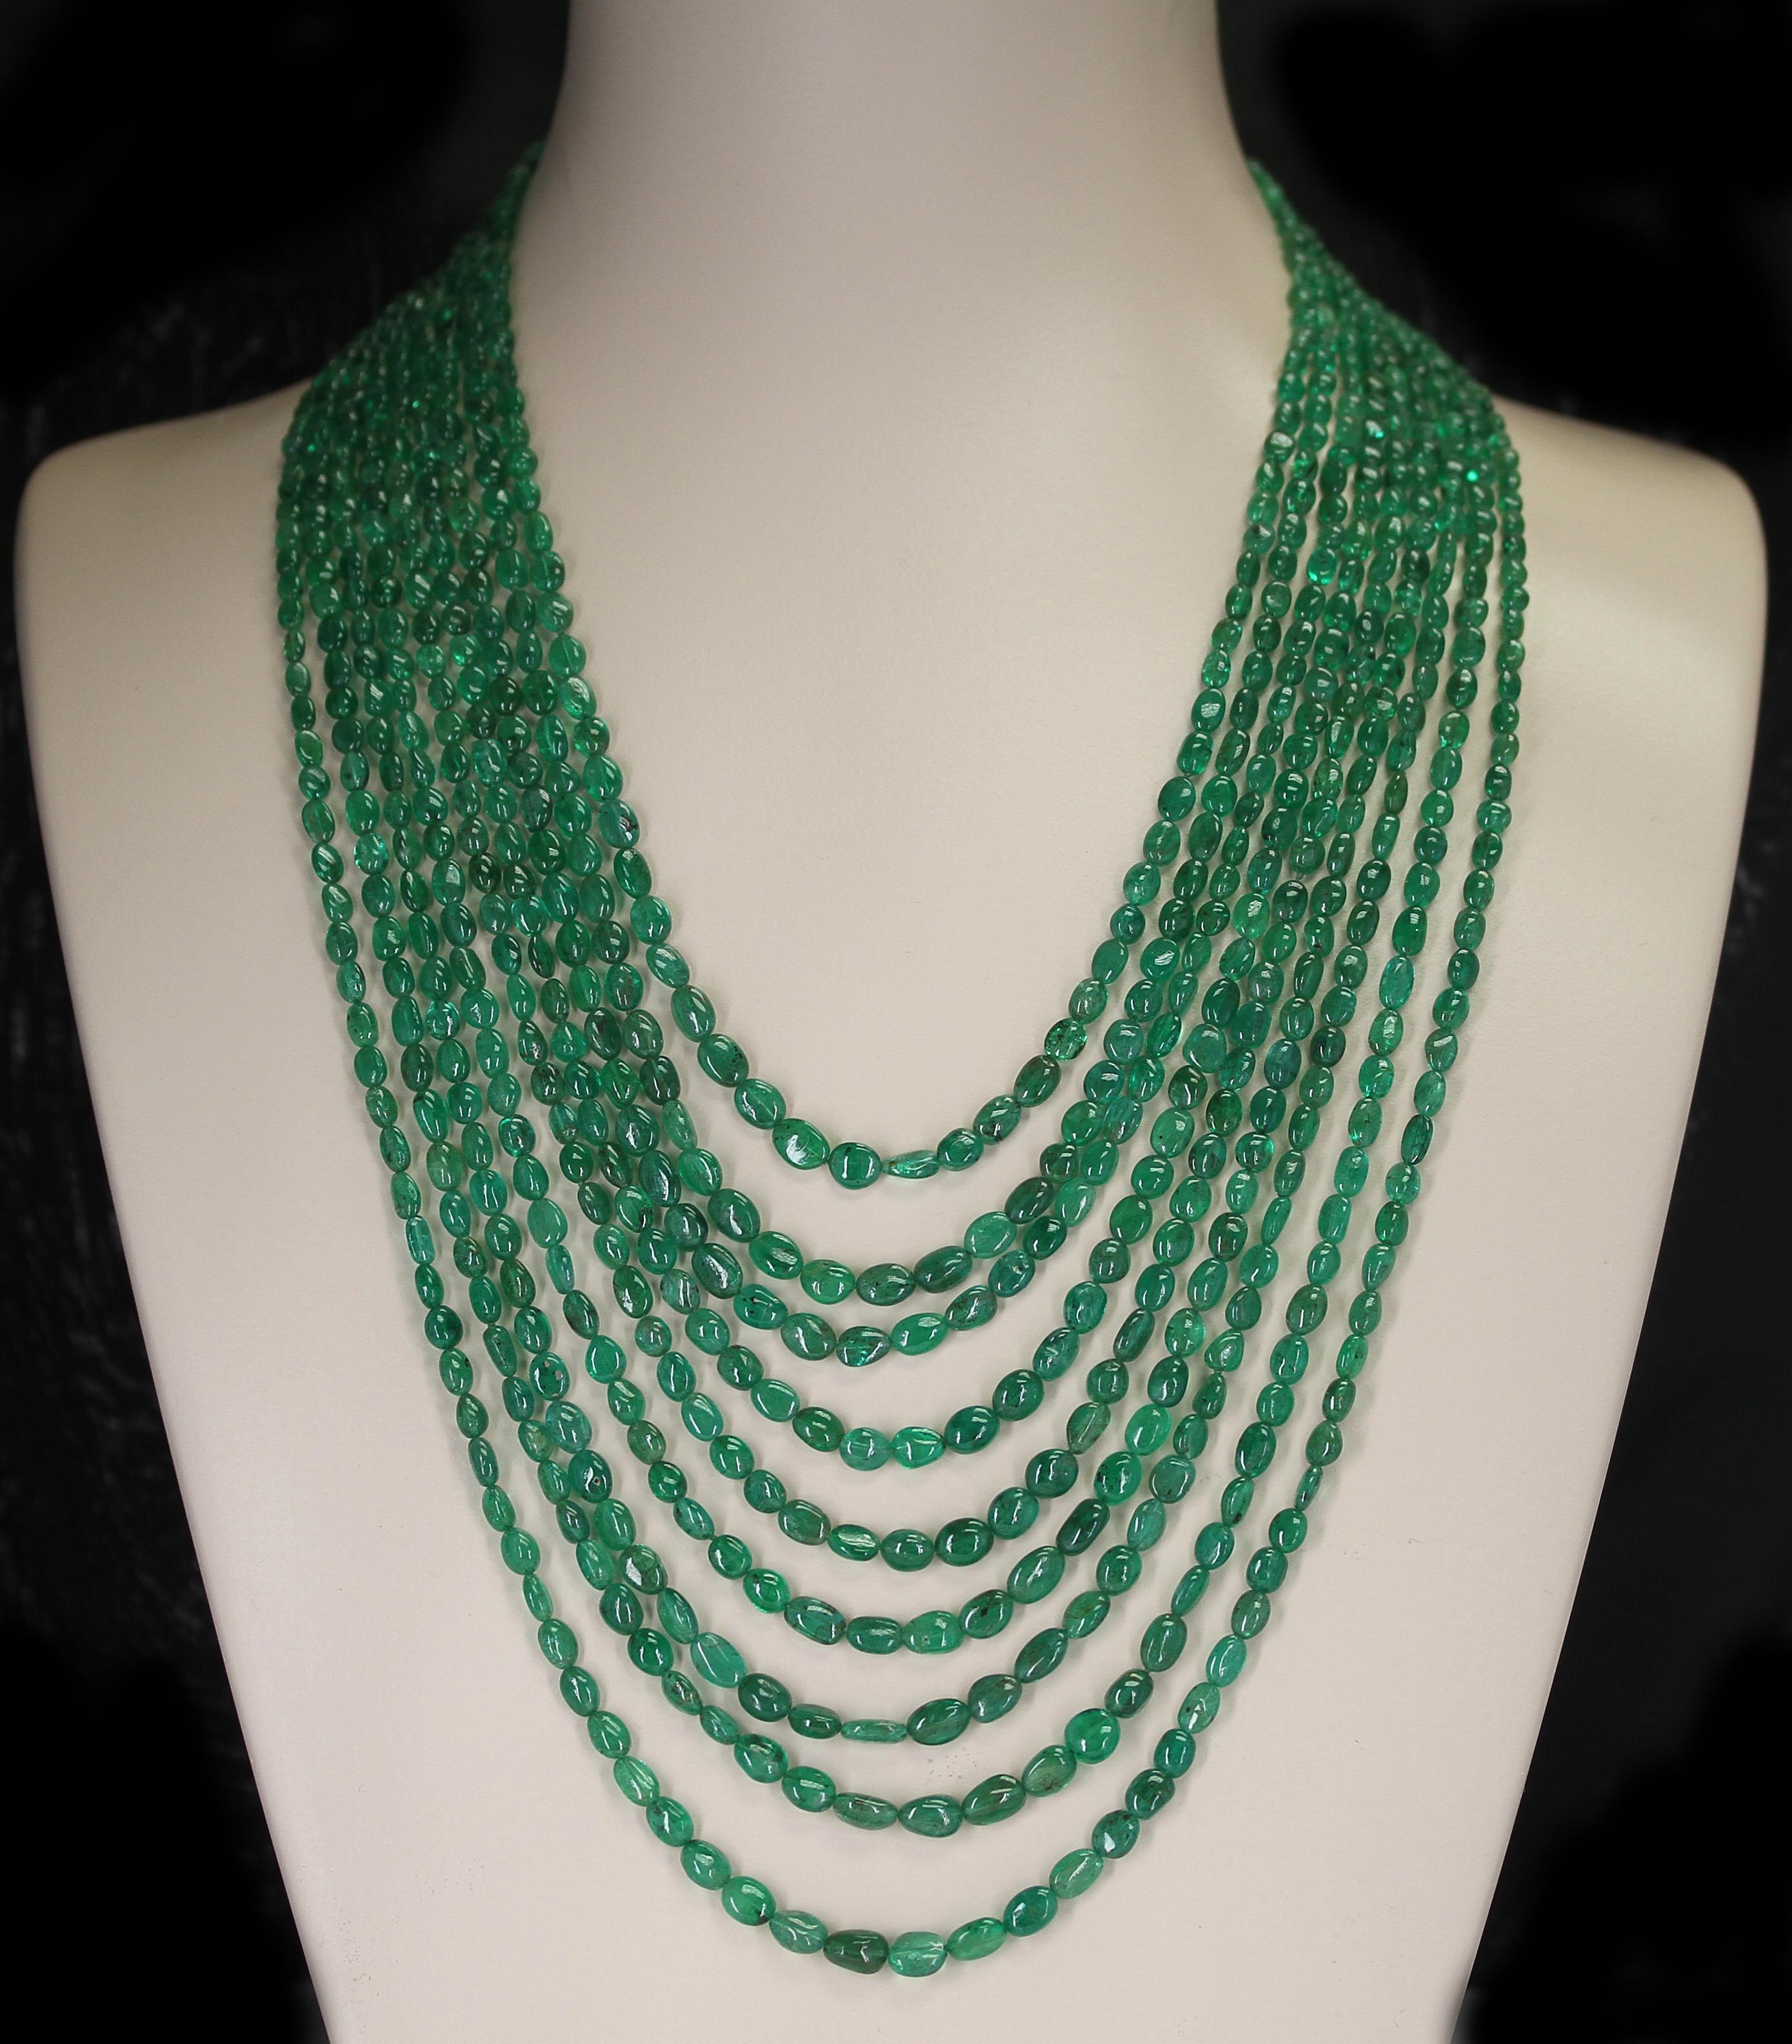 A Genuine & Natural Smooth Emerald Small Tumbled Beads Necklace with 9 Lines. The beads range from 5MM to 8 MM weighing 715 carats. The clasp is 14K Yellow Gold and the length ranges from 21.50